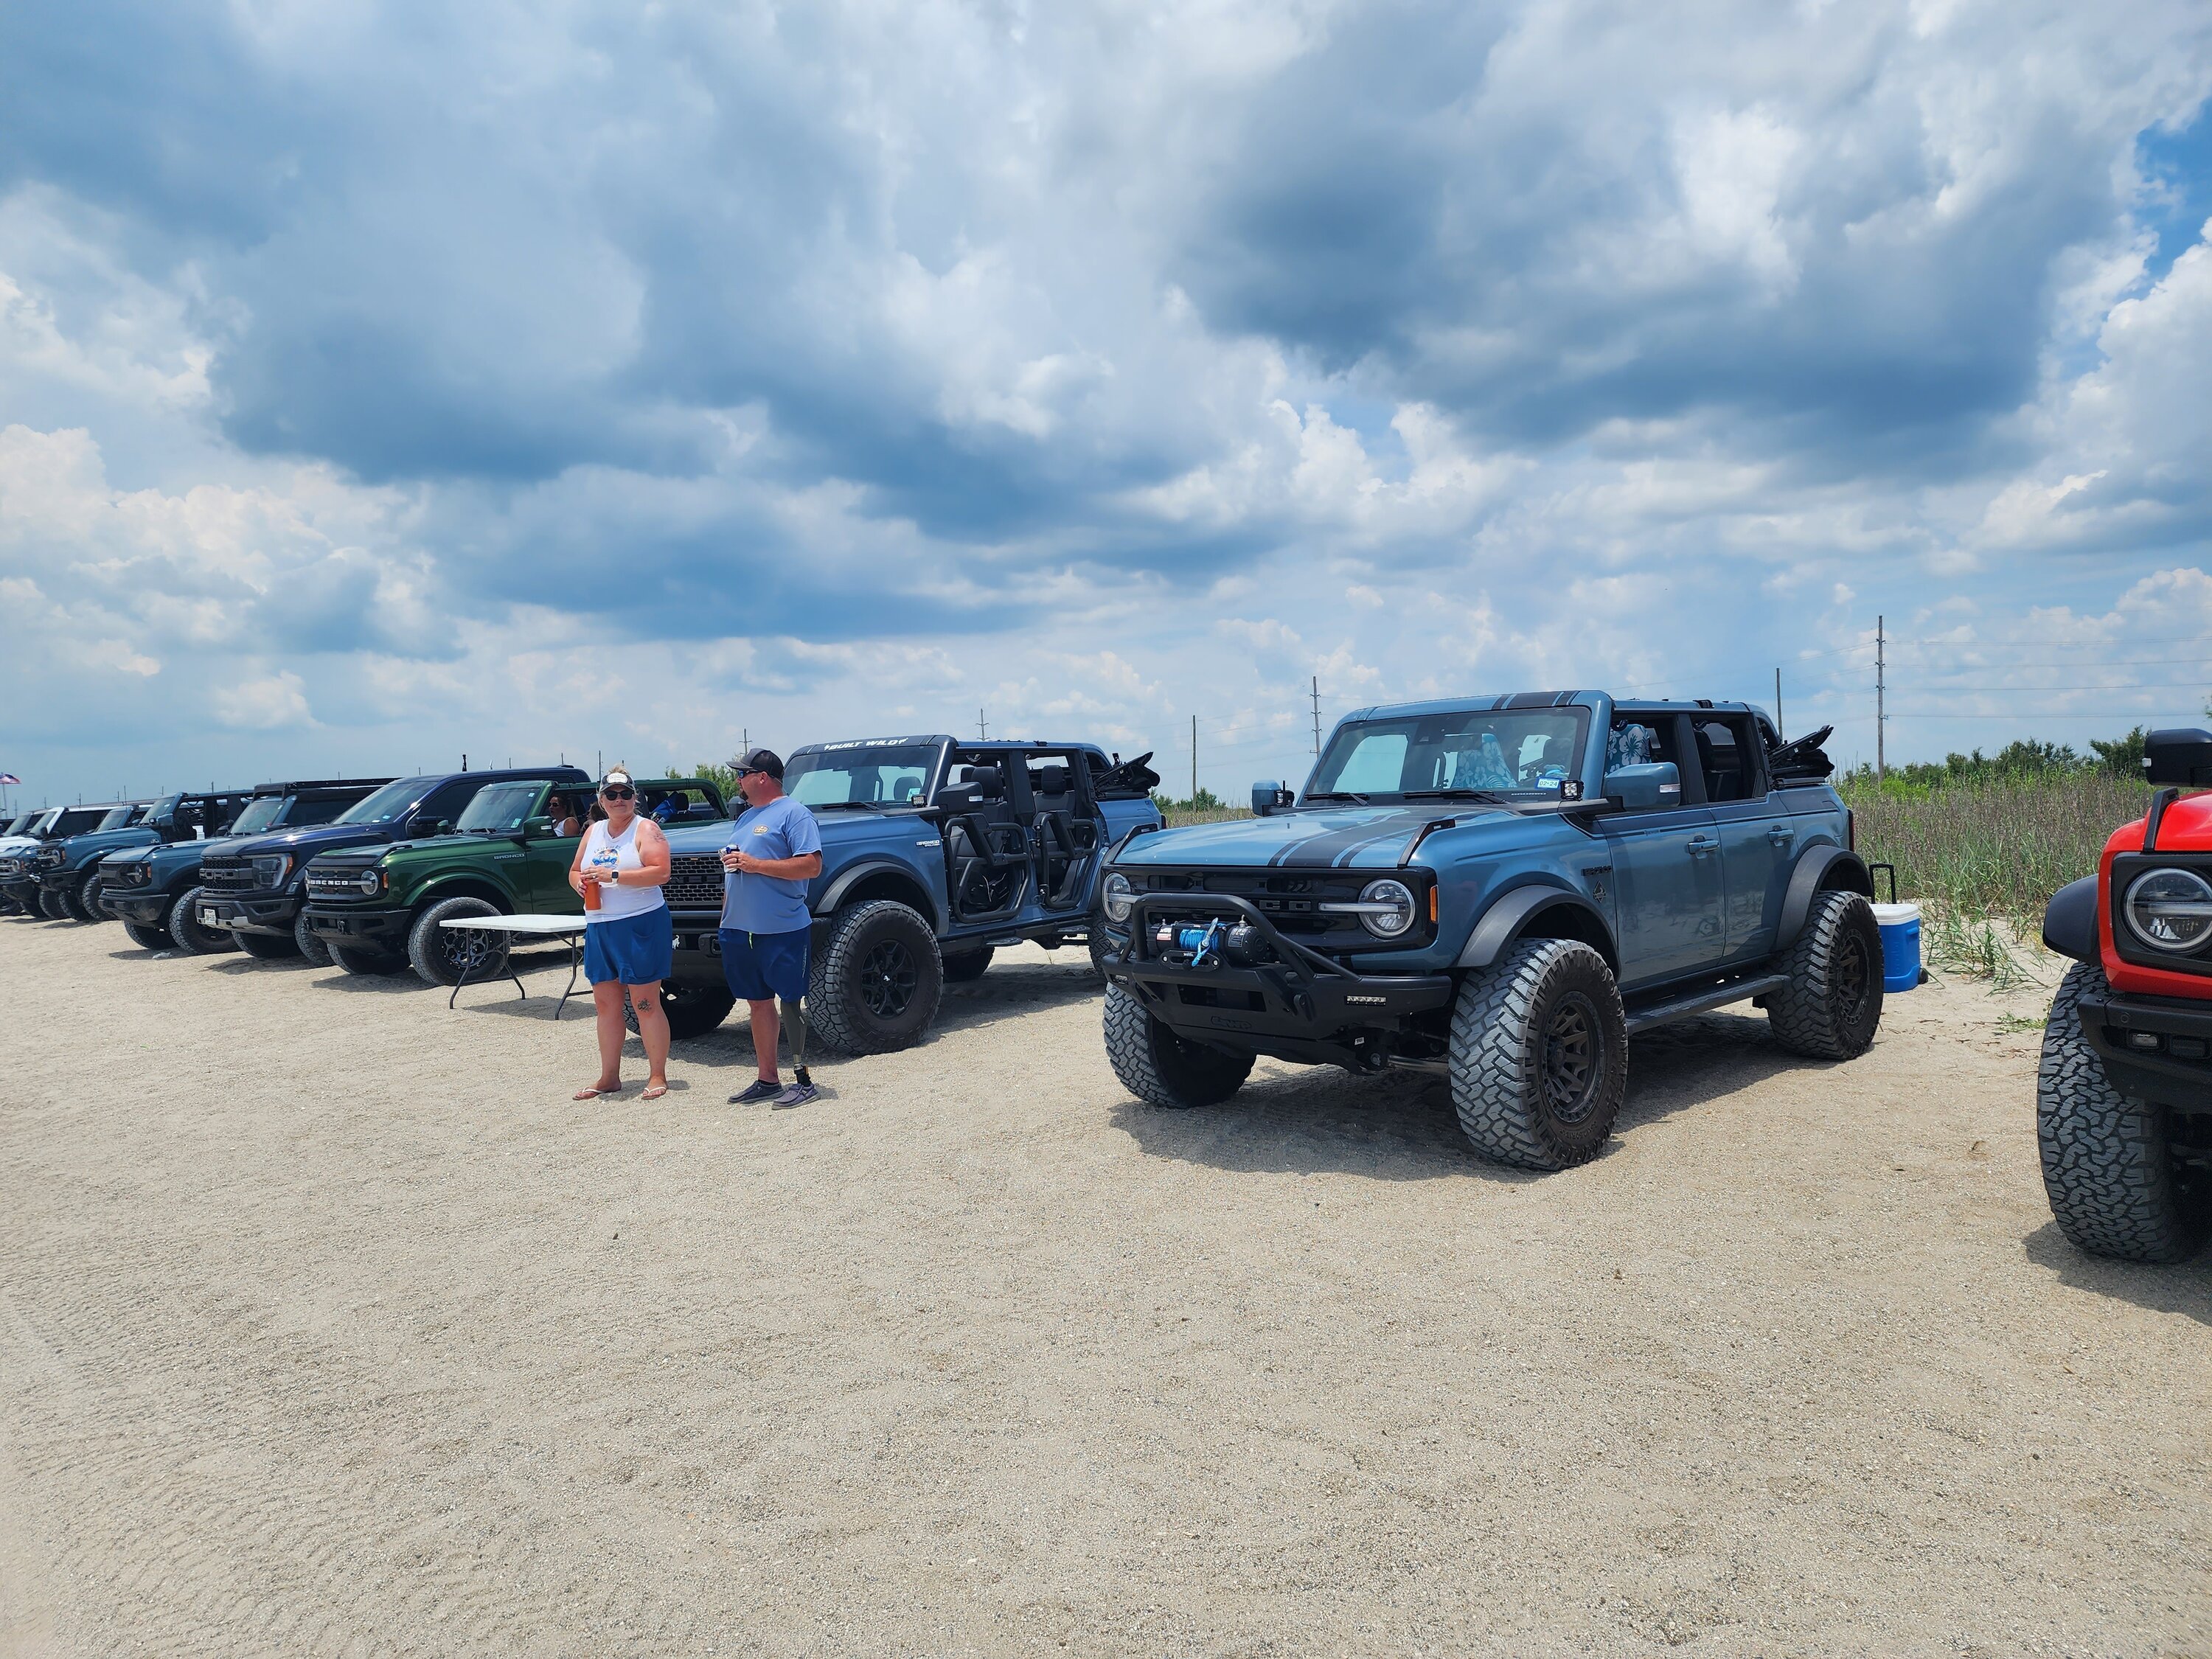 Ford Bronco Holly Beach Bronco Bash Sees 100+ Vehicle Turnout. Add Your Photos/Videos! 20230603_124726